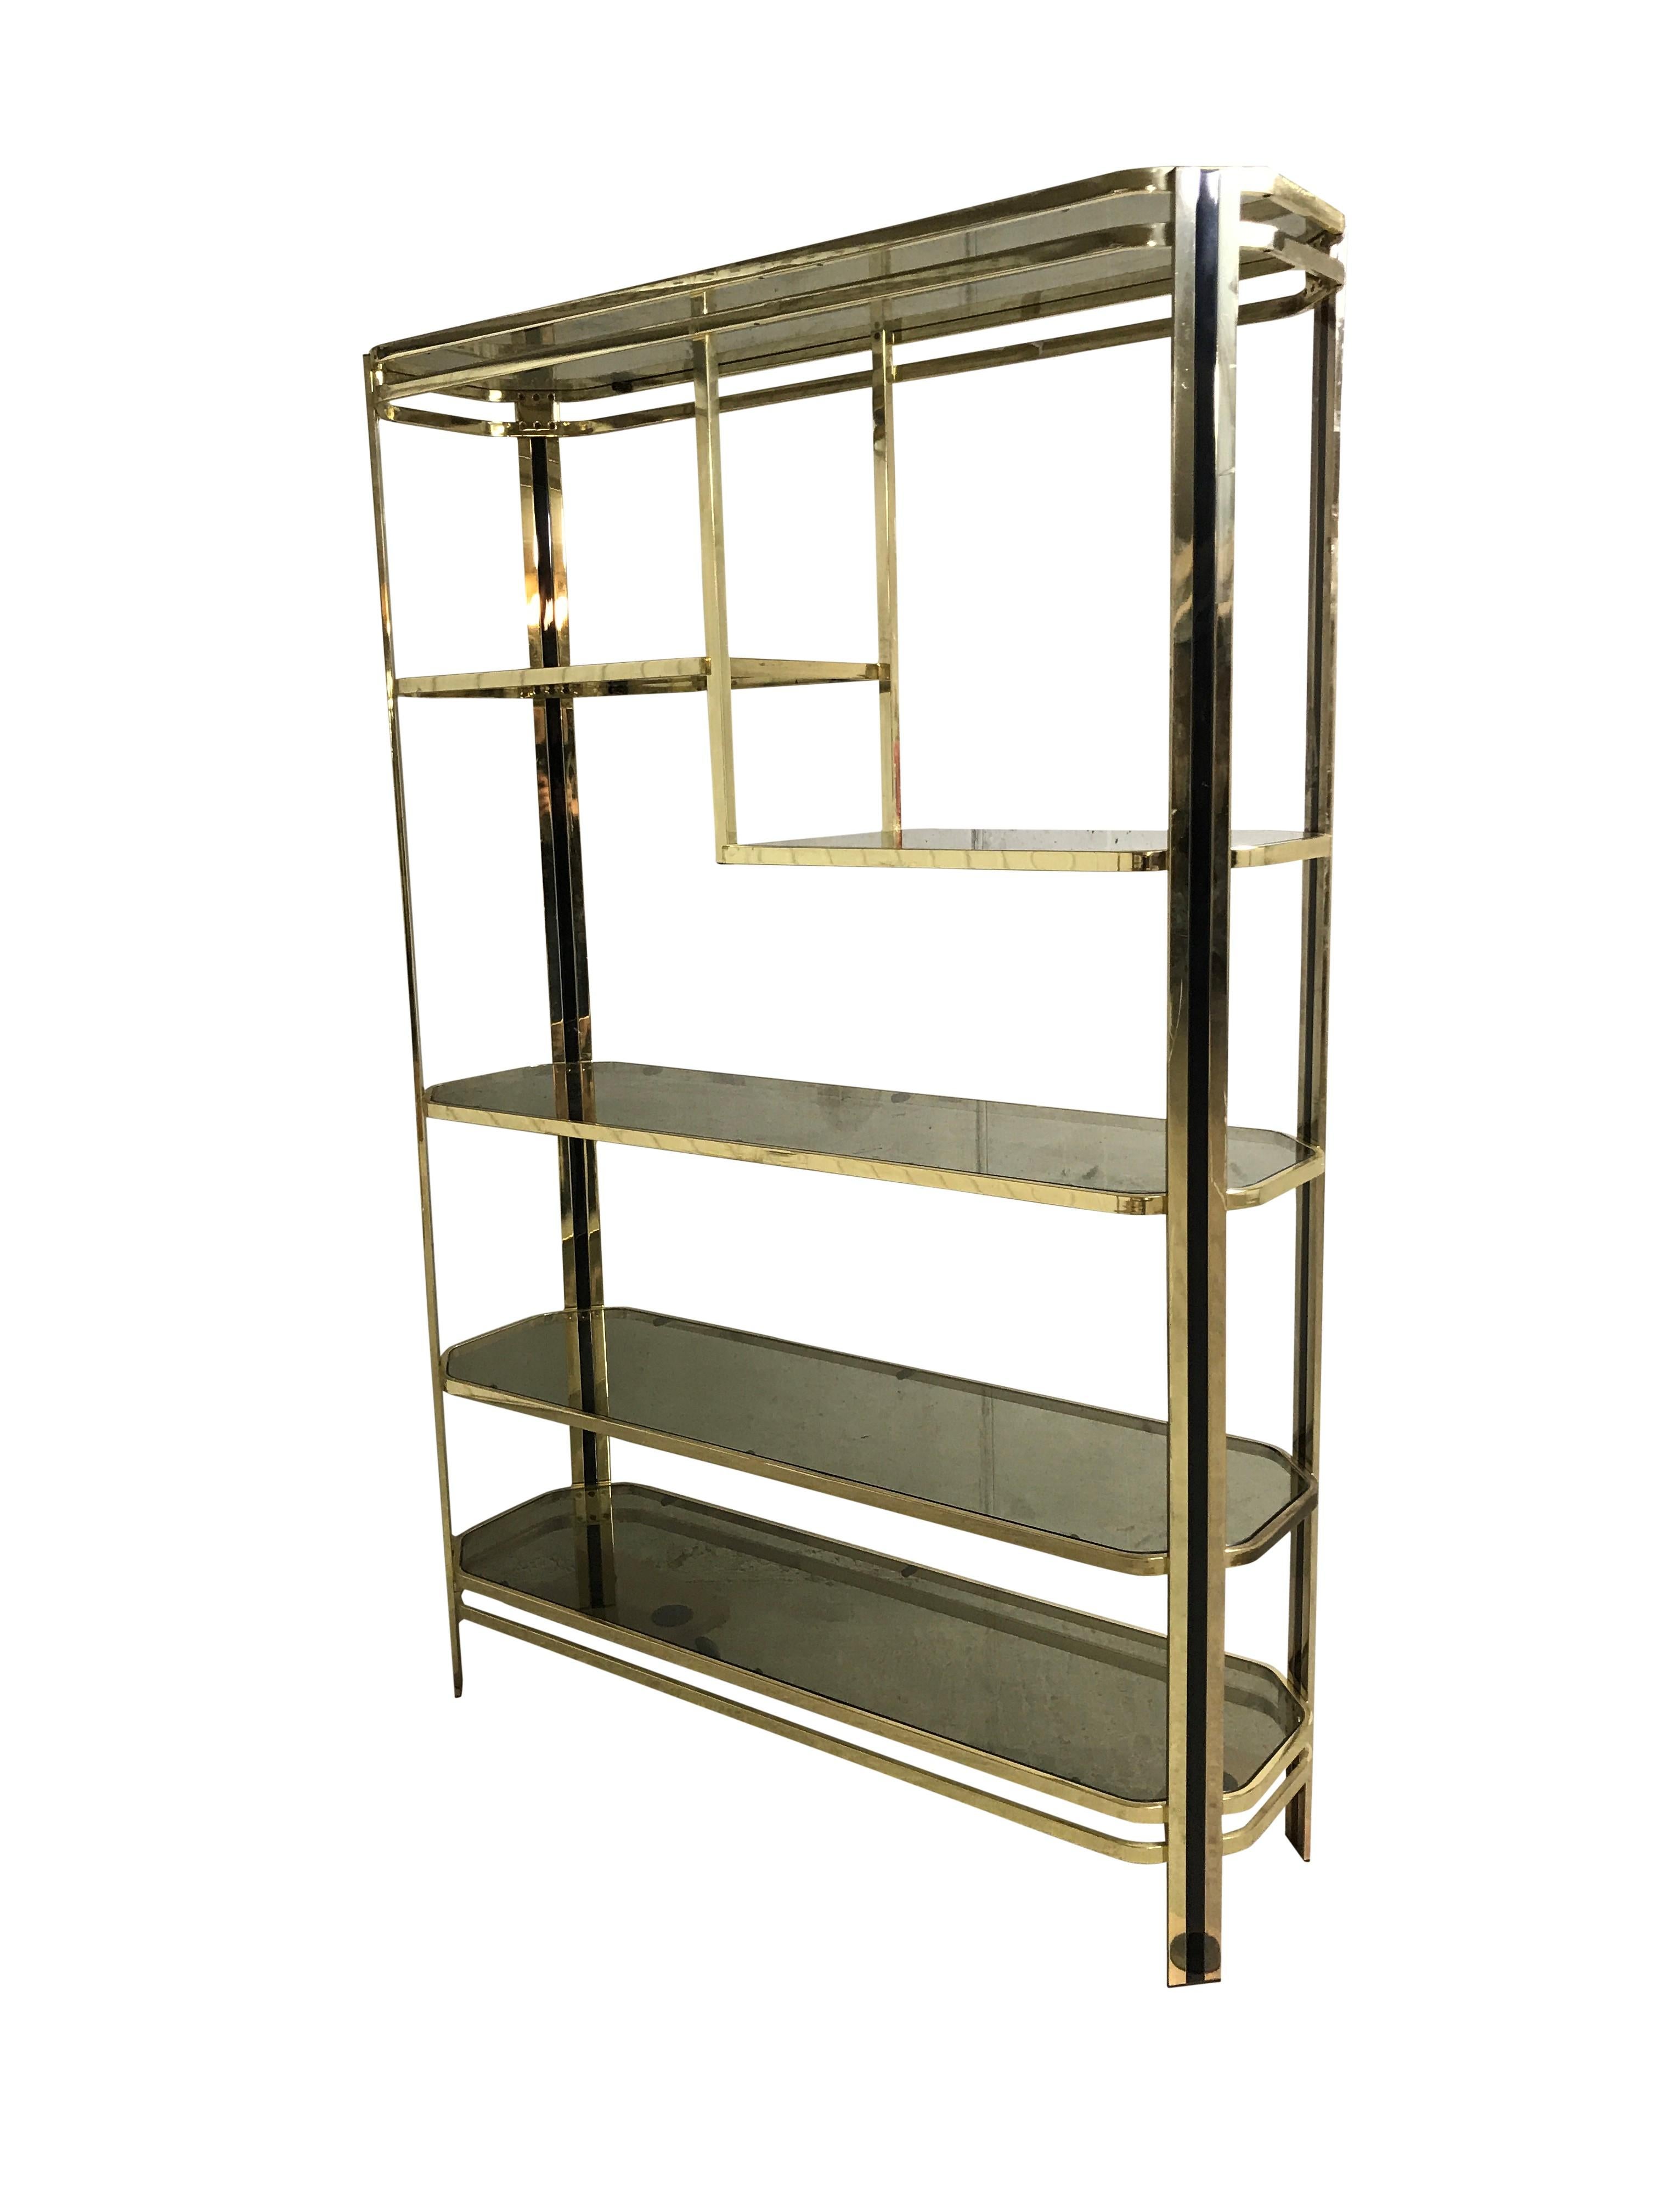 Good looking brass shelf unit or étagère with multi-level glasses.

Beautiful original condition with smoked glass.

1970s, Belgium

One of the glasses has a very minor chip, not disturbing.

Measures: Height 181 cm/ 71